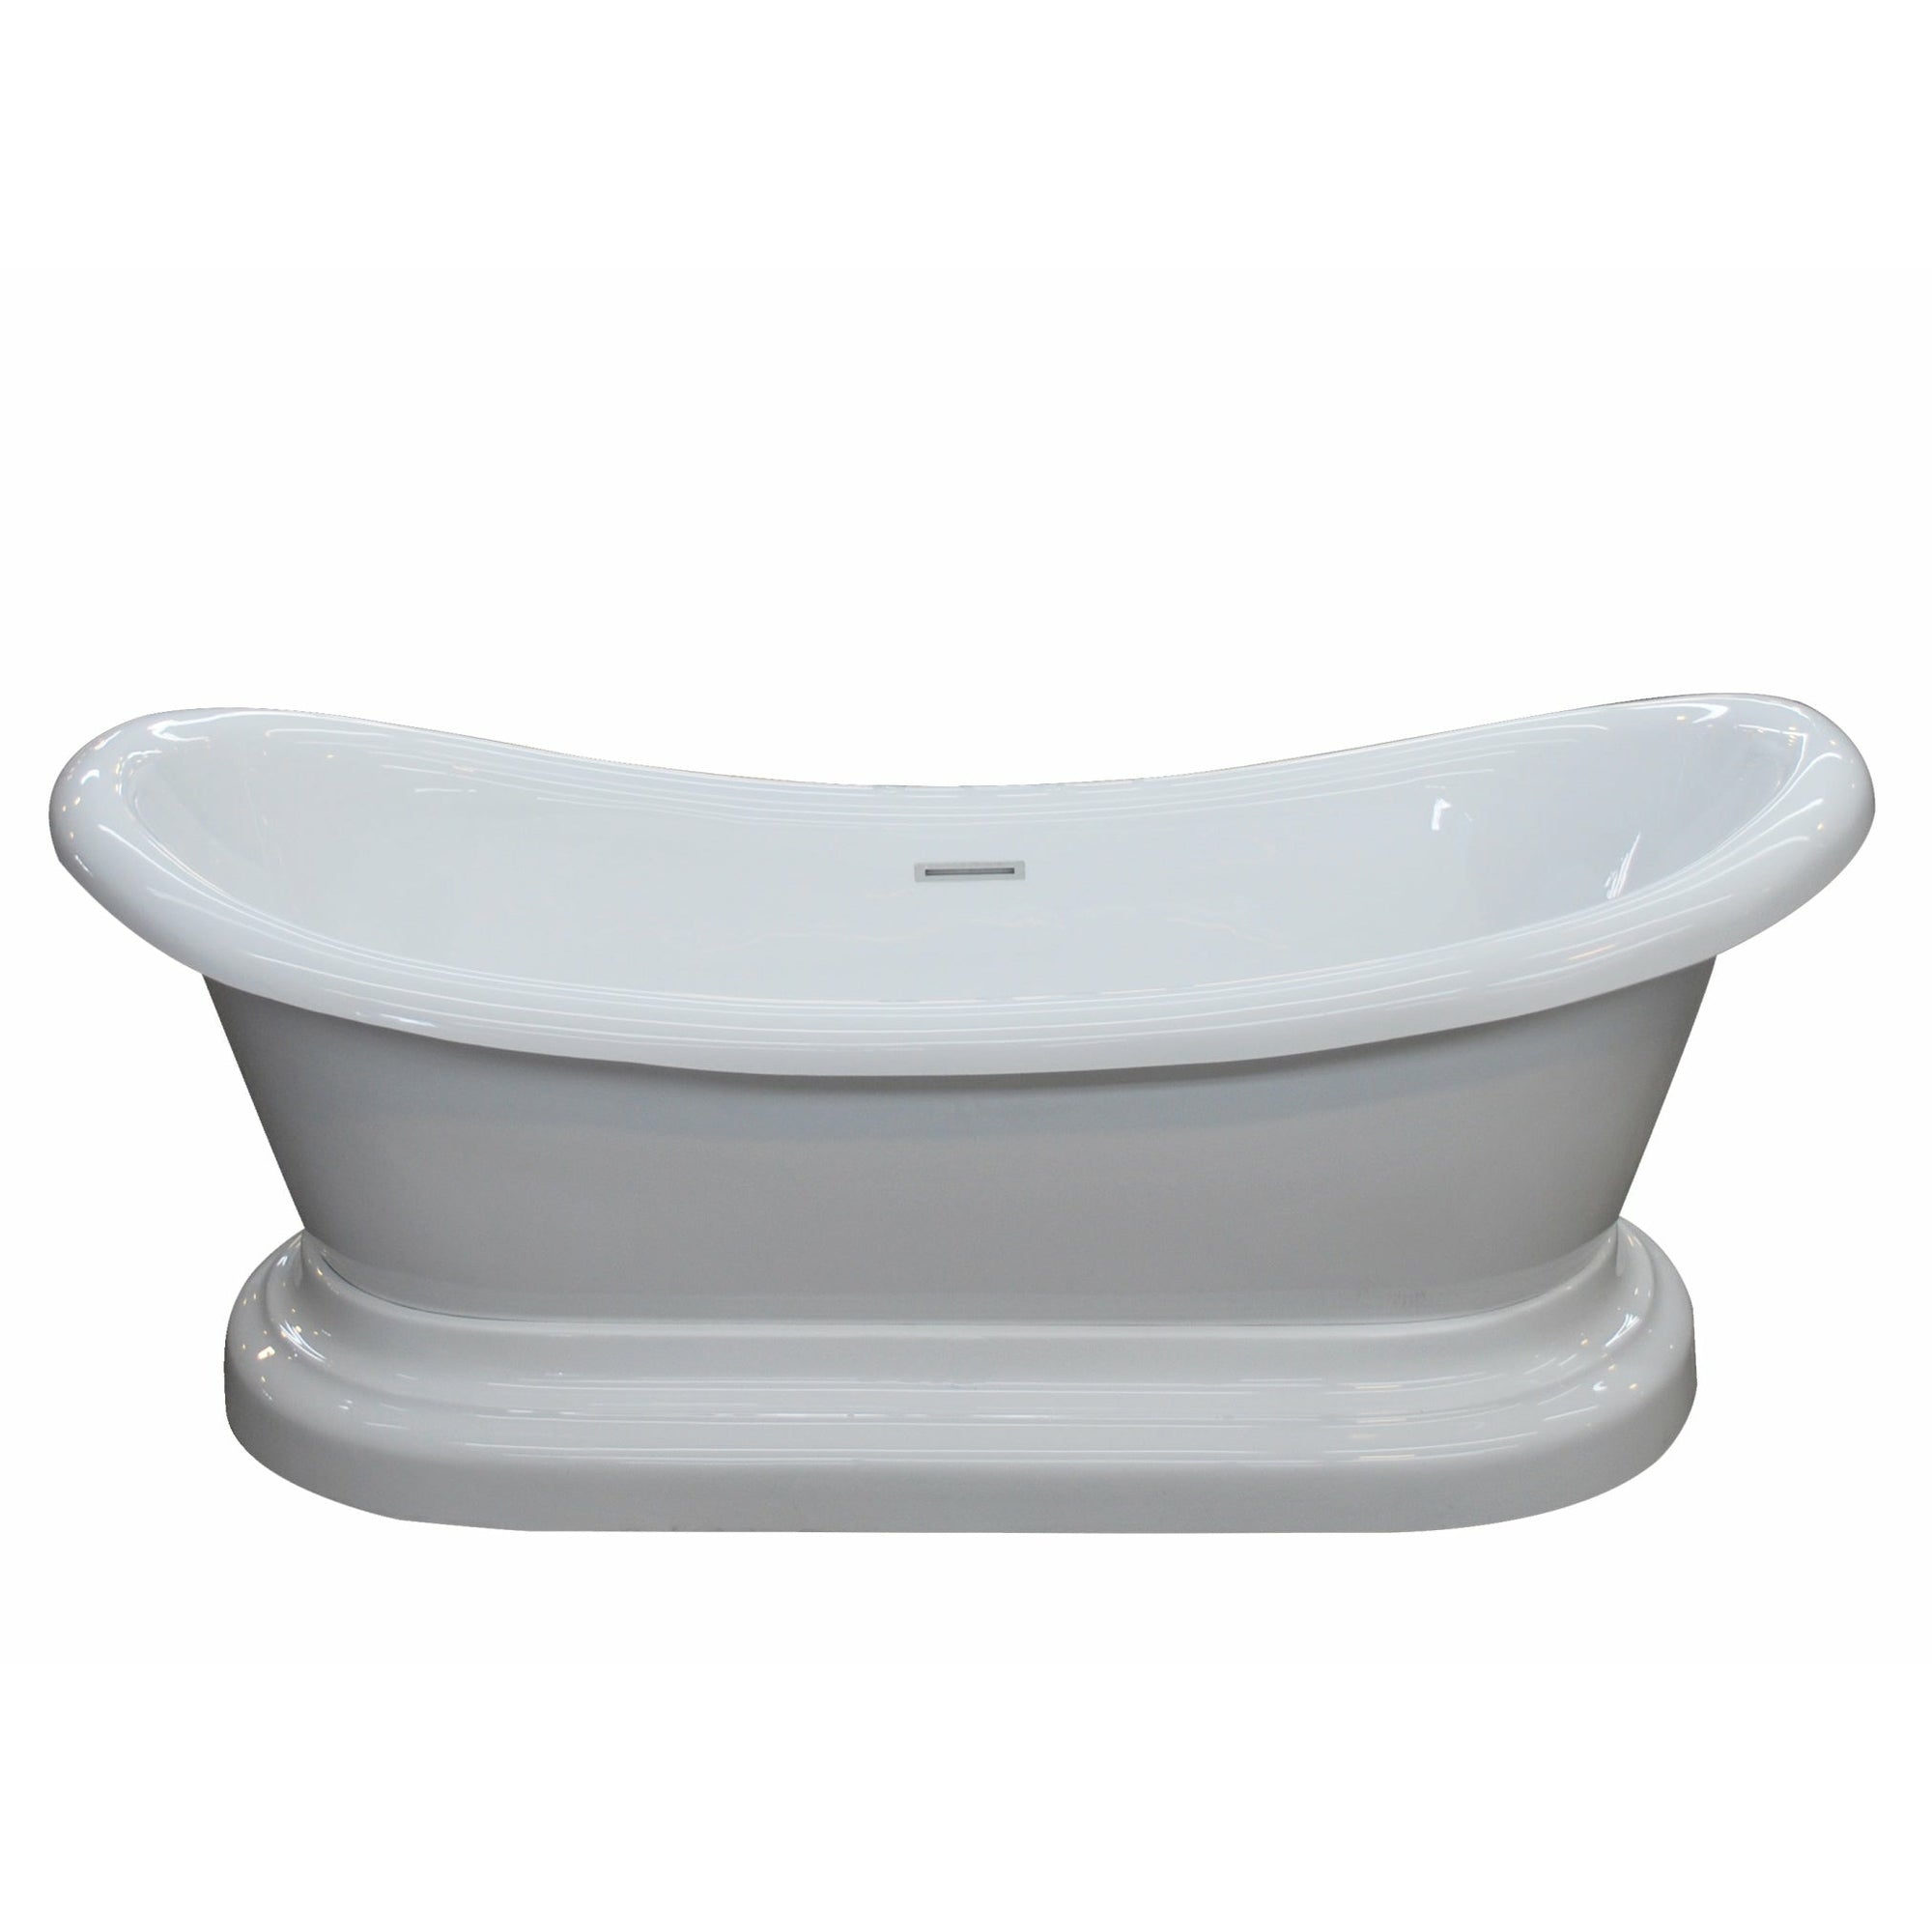 Anzzi Ruby 5.9 ft. Acrylic Flatbottom Non-Whirlpool Bathtub-Marine Grade Acrylic High Gloss White Finish - Built-in Chrome Overflow and Push Operated Center Drain - FT-AZ113 - Vital Hydrotherapy